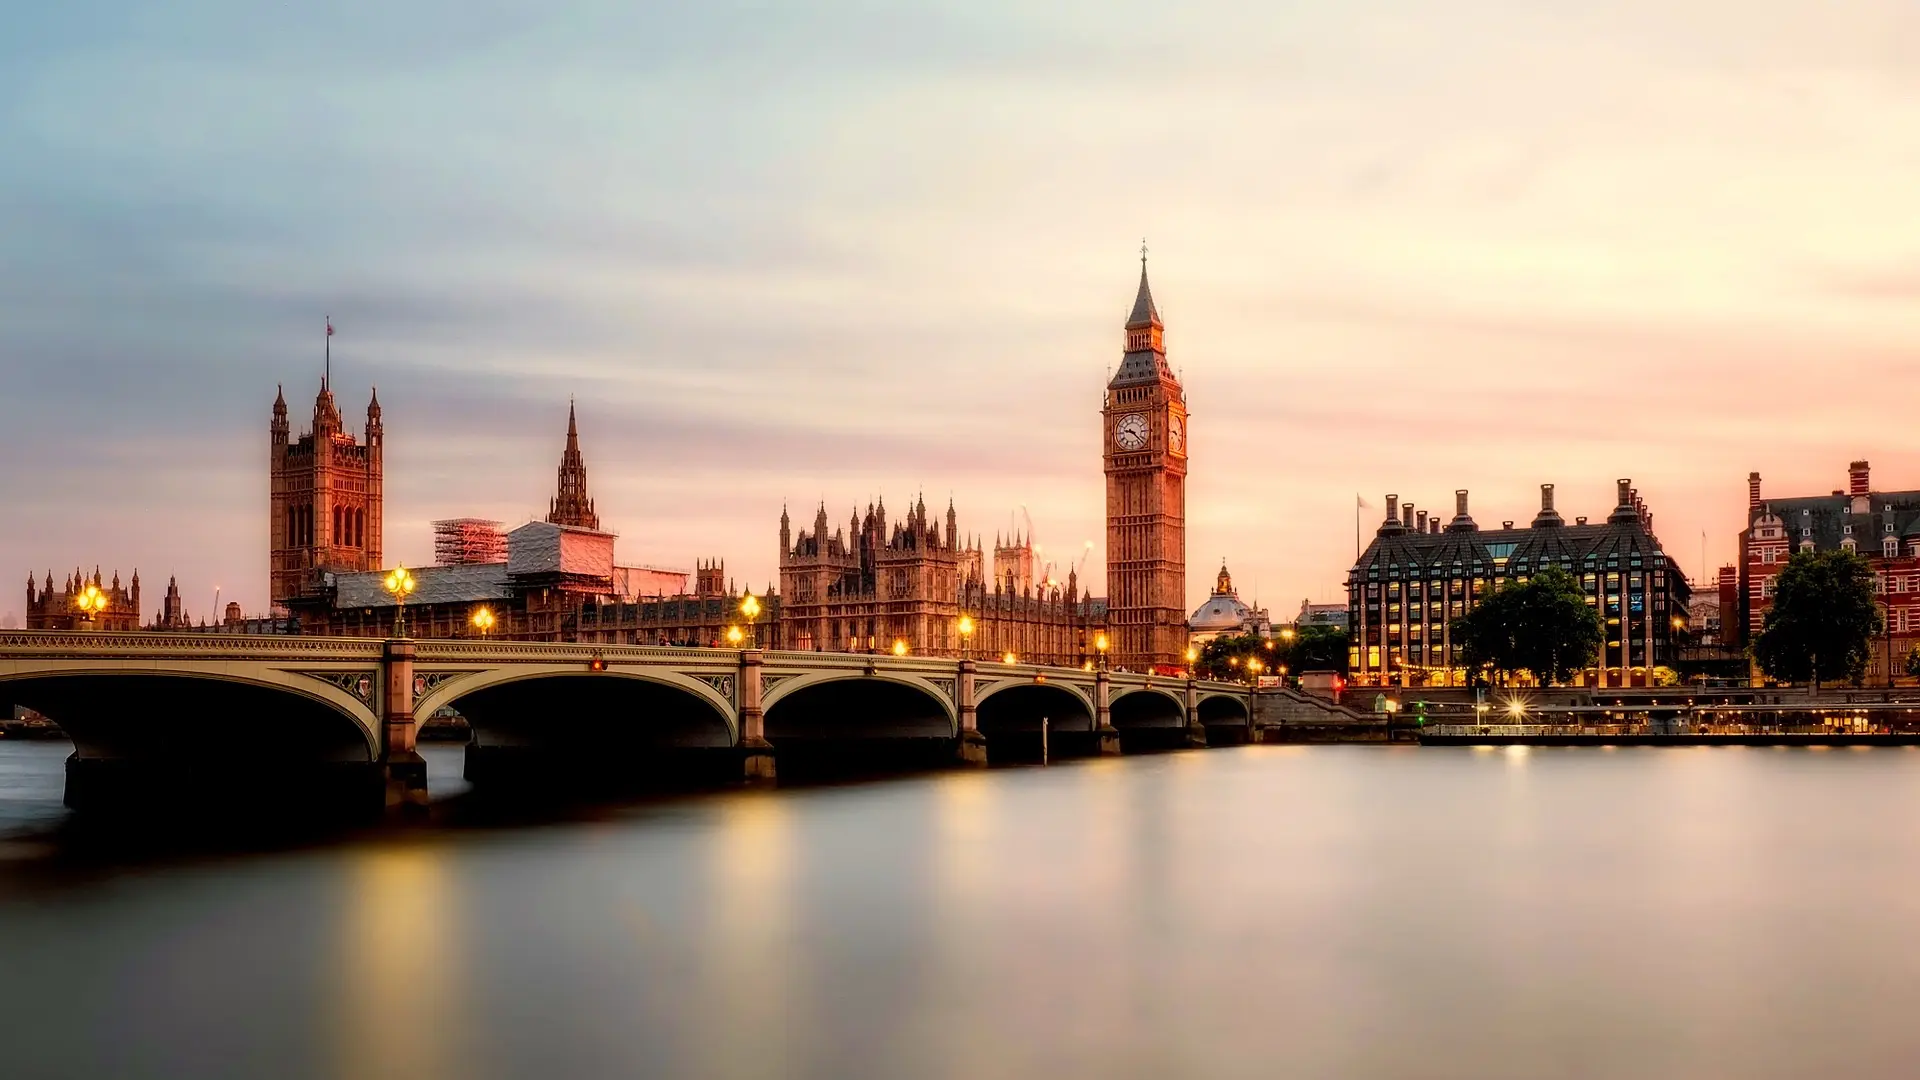 View from the water to the westminster bridge, BigBen clock tower and a beautiful sunset lighting.